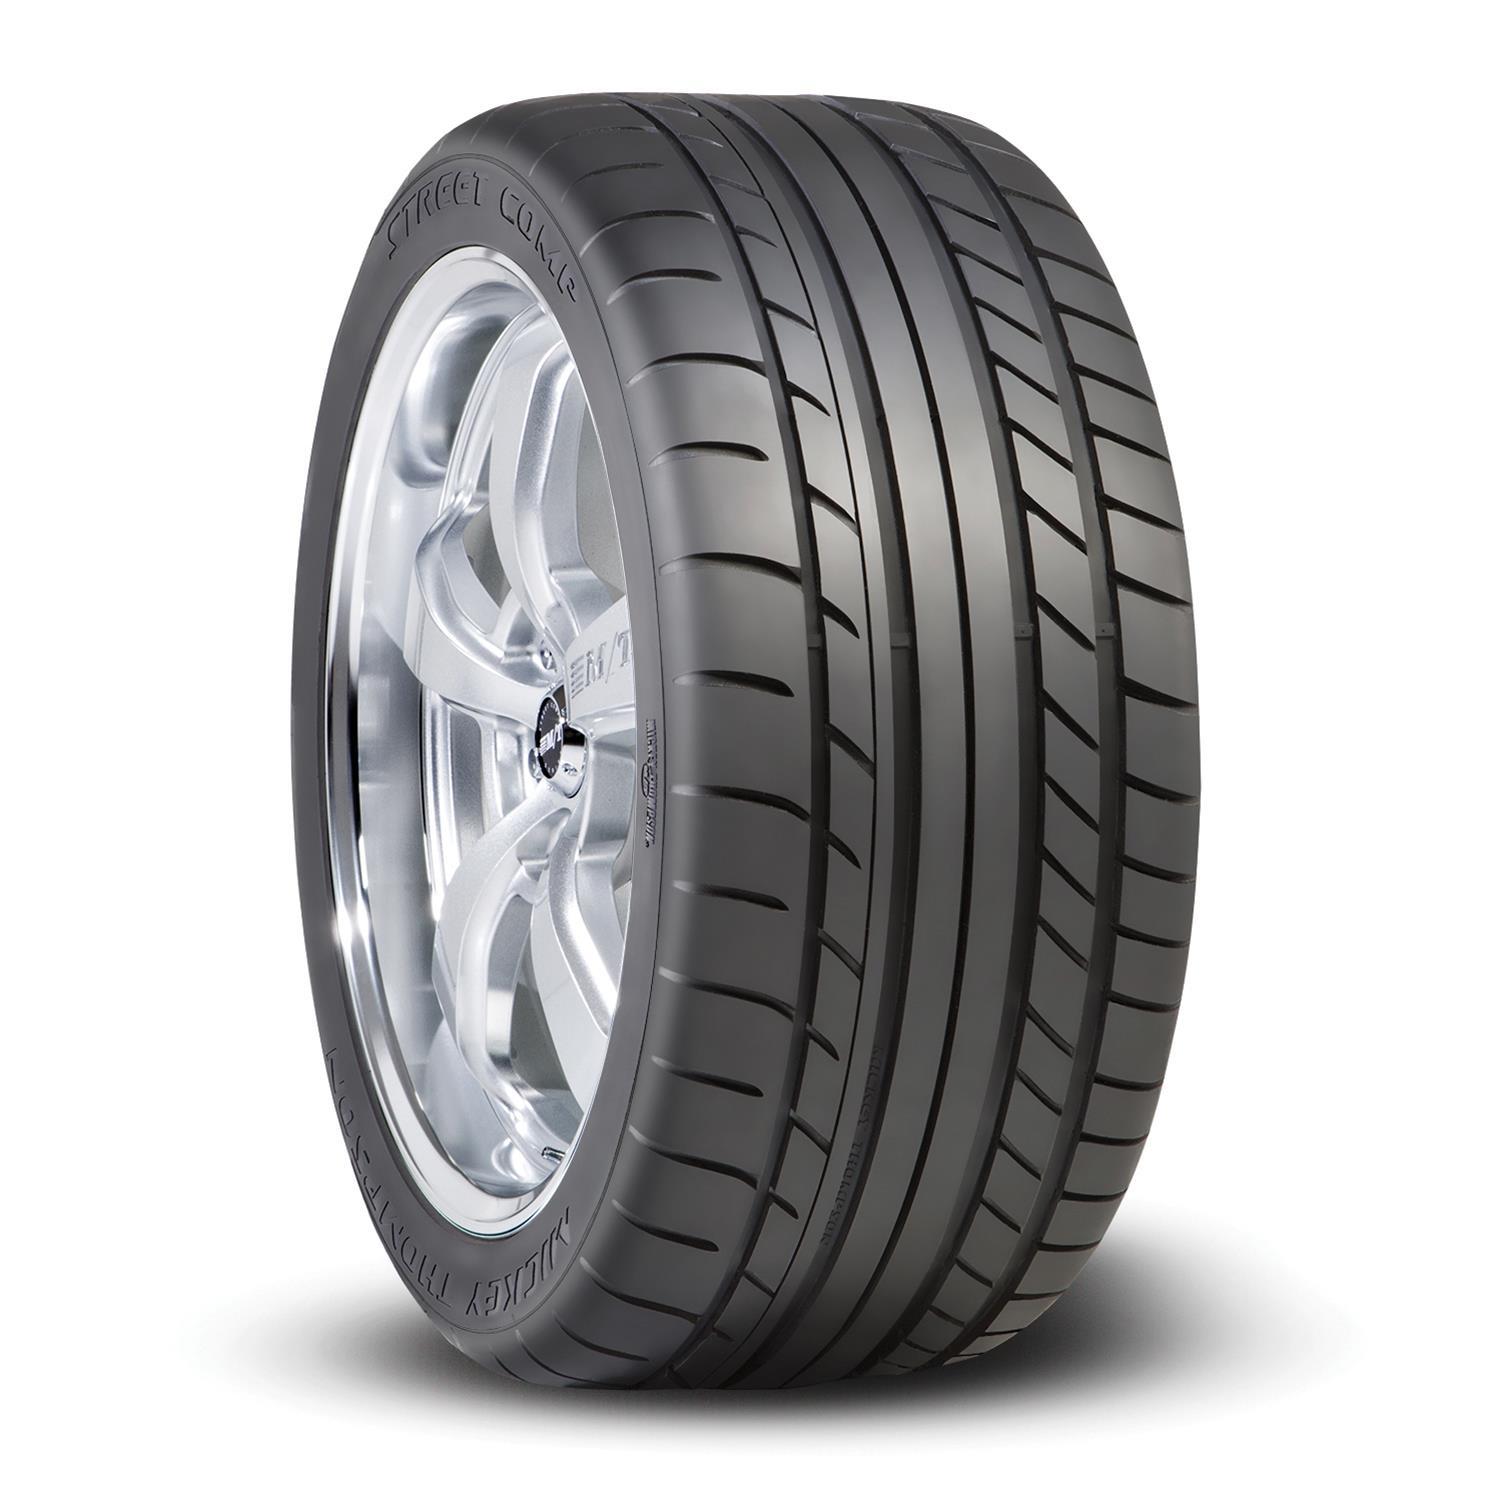 255/45R18 UHP Street Comp Tire - 248824